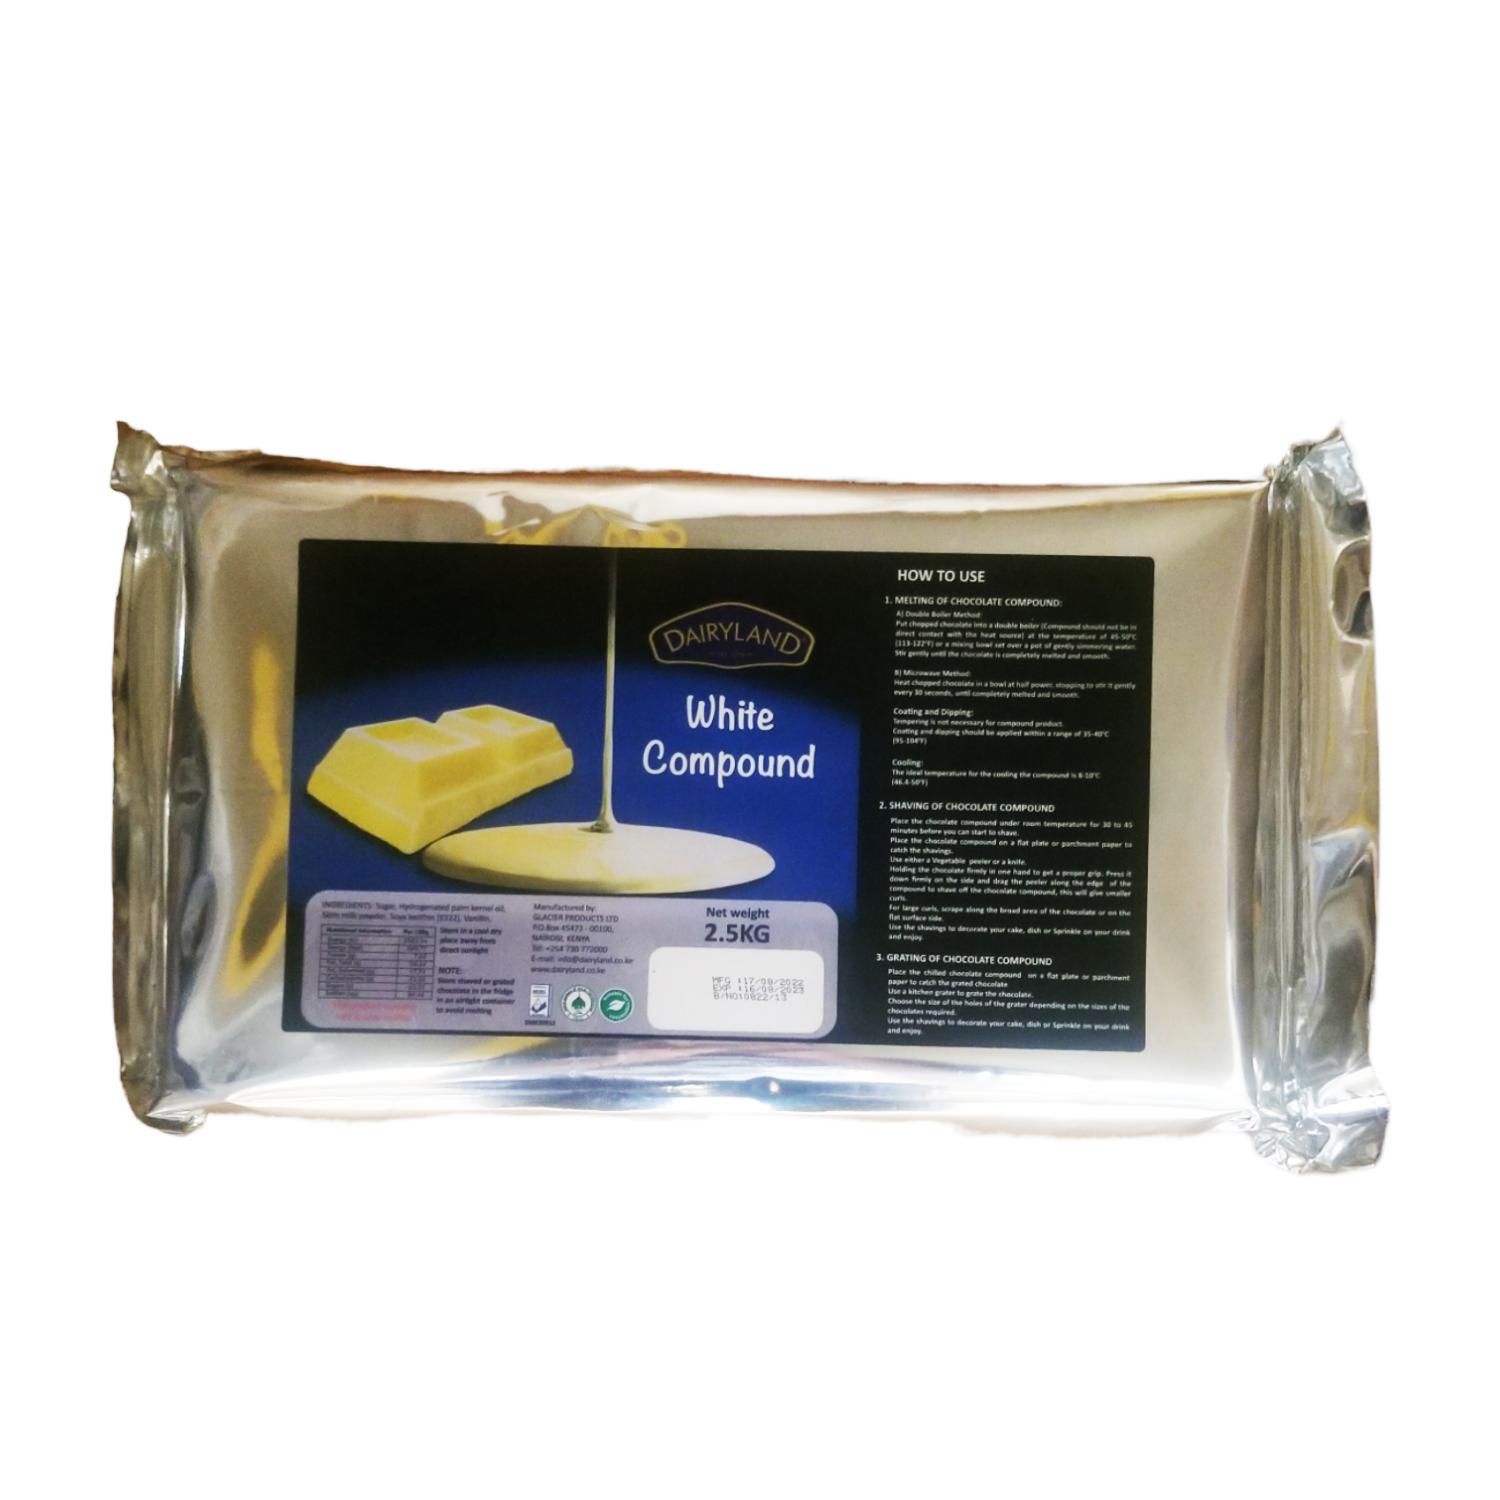 PACK OF 4 - DAIRYLAND WHITE CHOCOLATE COMPOUND 2.5KG (Wholesale)